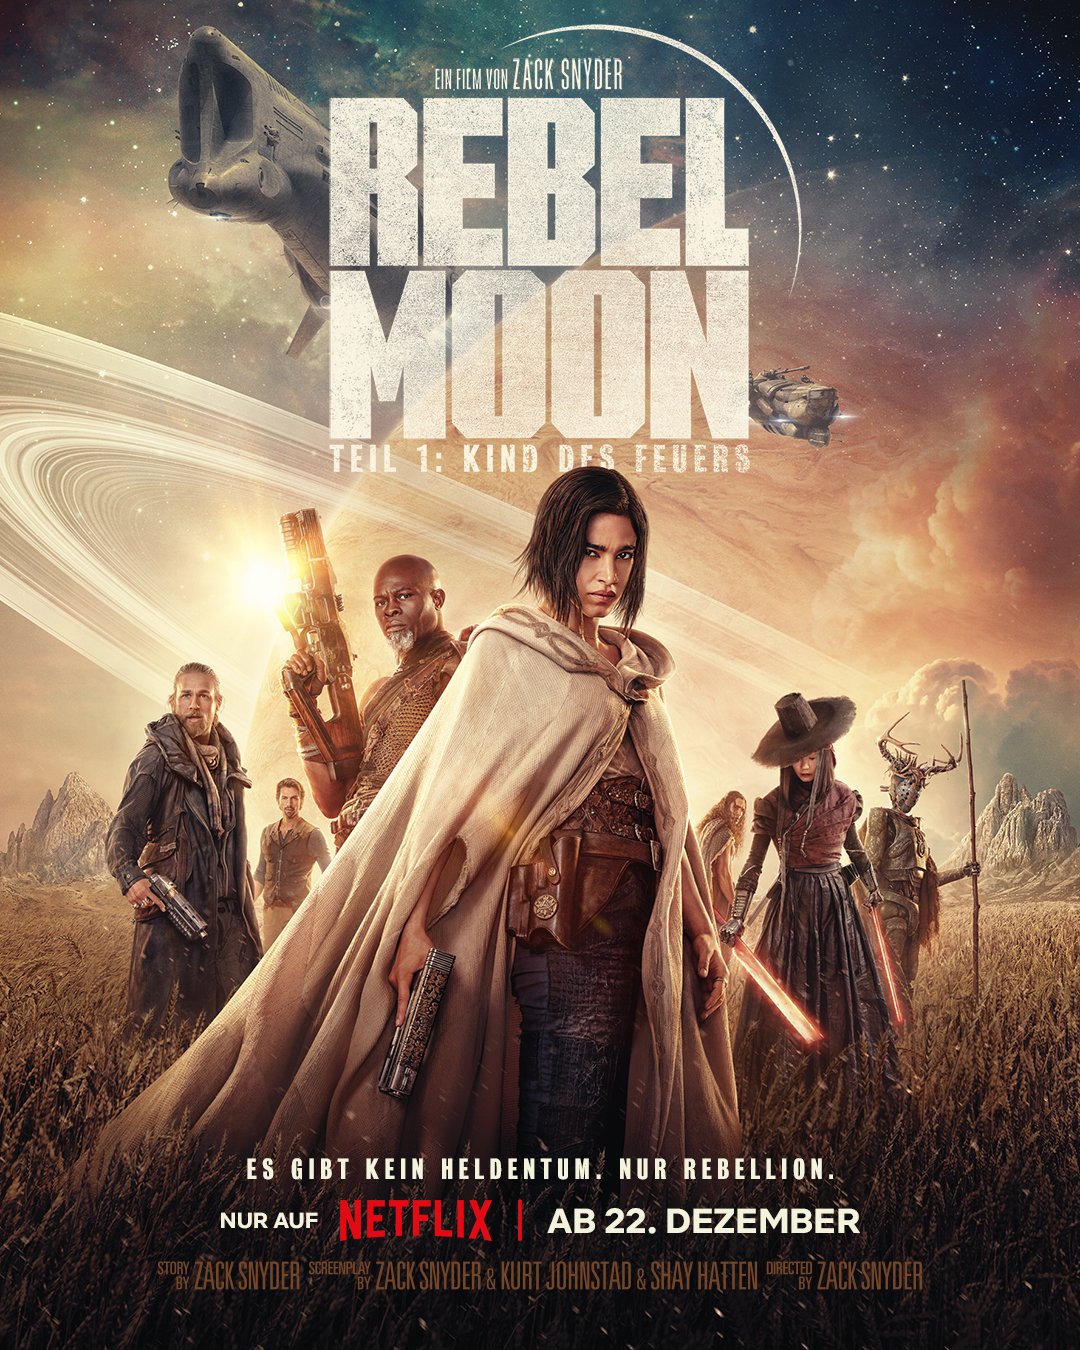 andy holness recommends Rebel Full Movie Hd